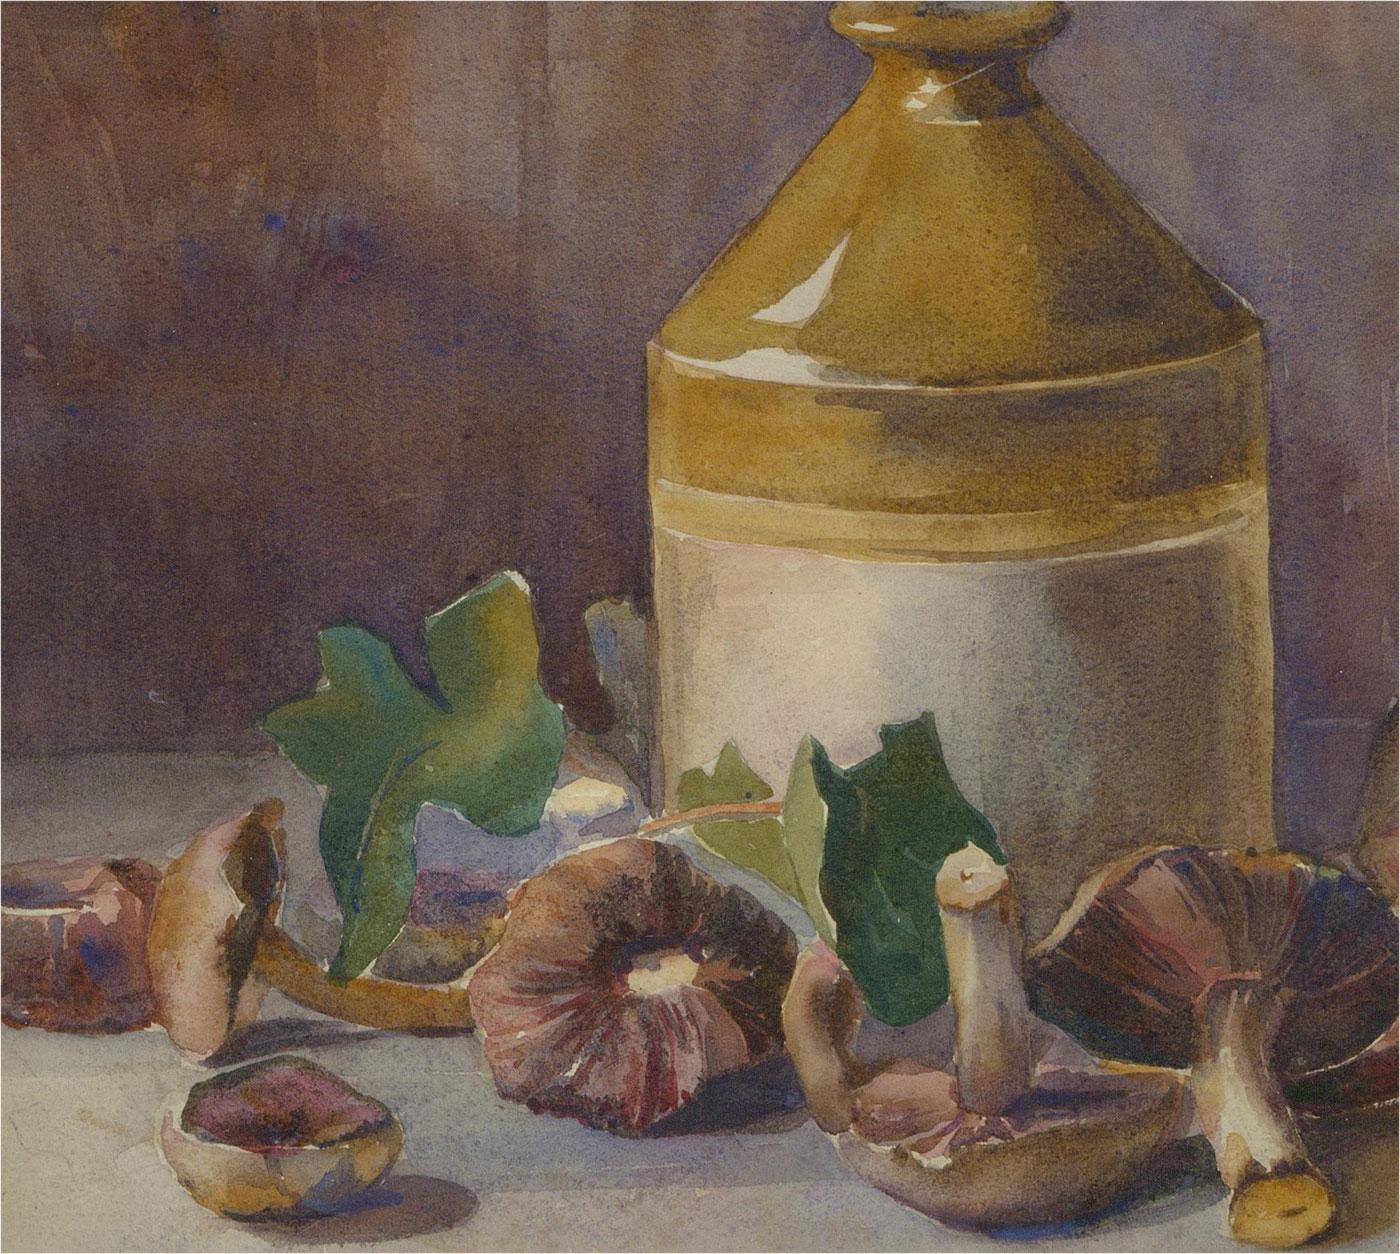 Early 20th Century Watercolour - Mushrooms And Earthenware - Art by Unknown